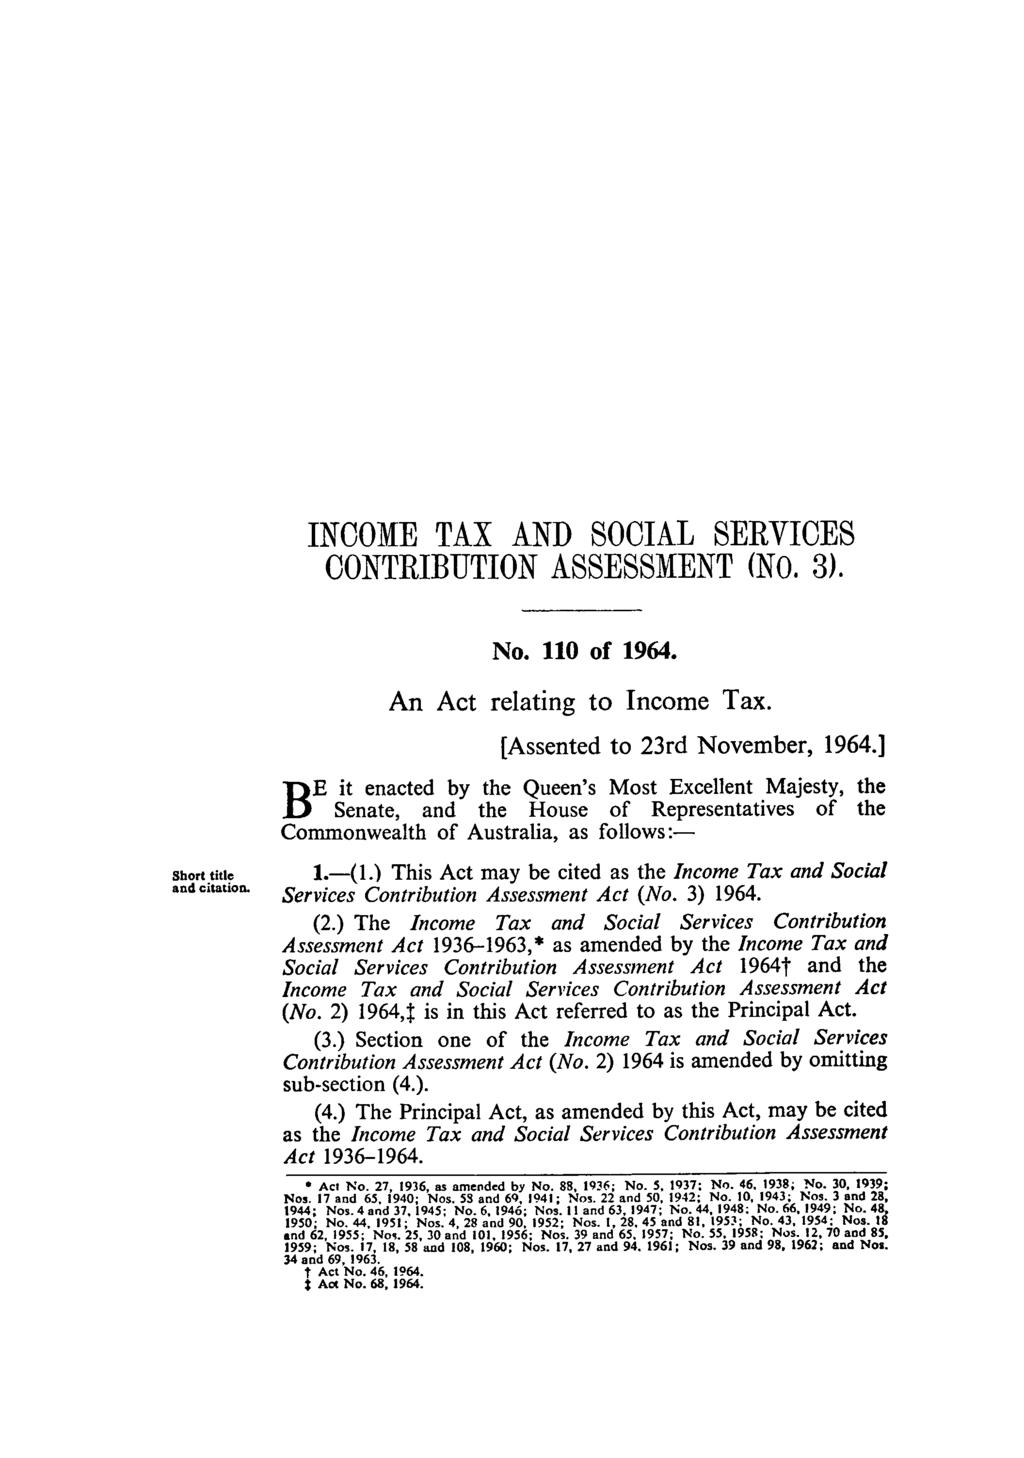 INCOME TAX AND SOCIAL SERVICES CONTRIBUTION ASSESSMENT (NO. 3). No. 110 of 1964. An Act relating to Income Tax. [Assented to 23rd November, 1964.